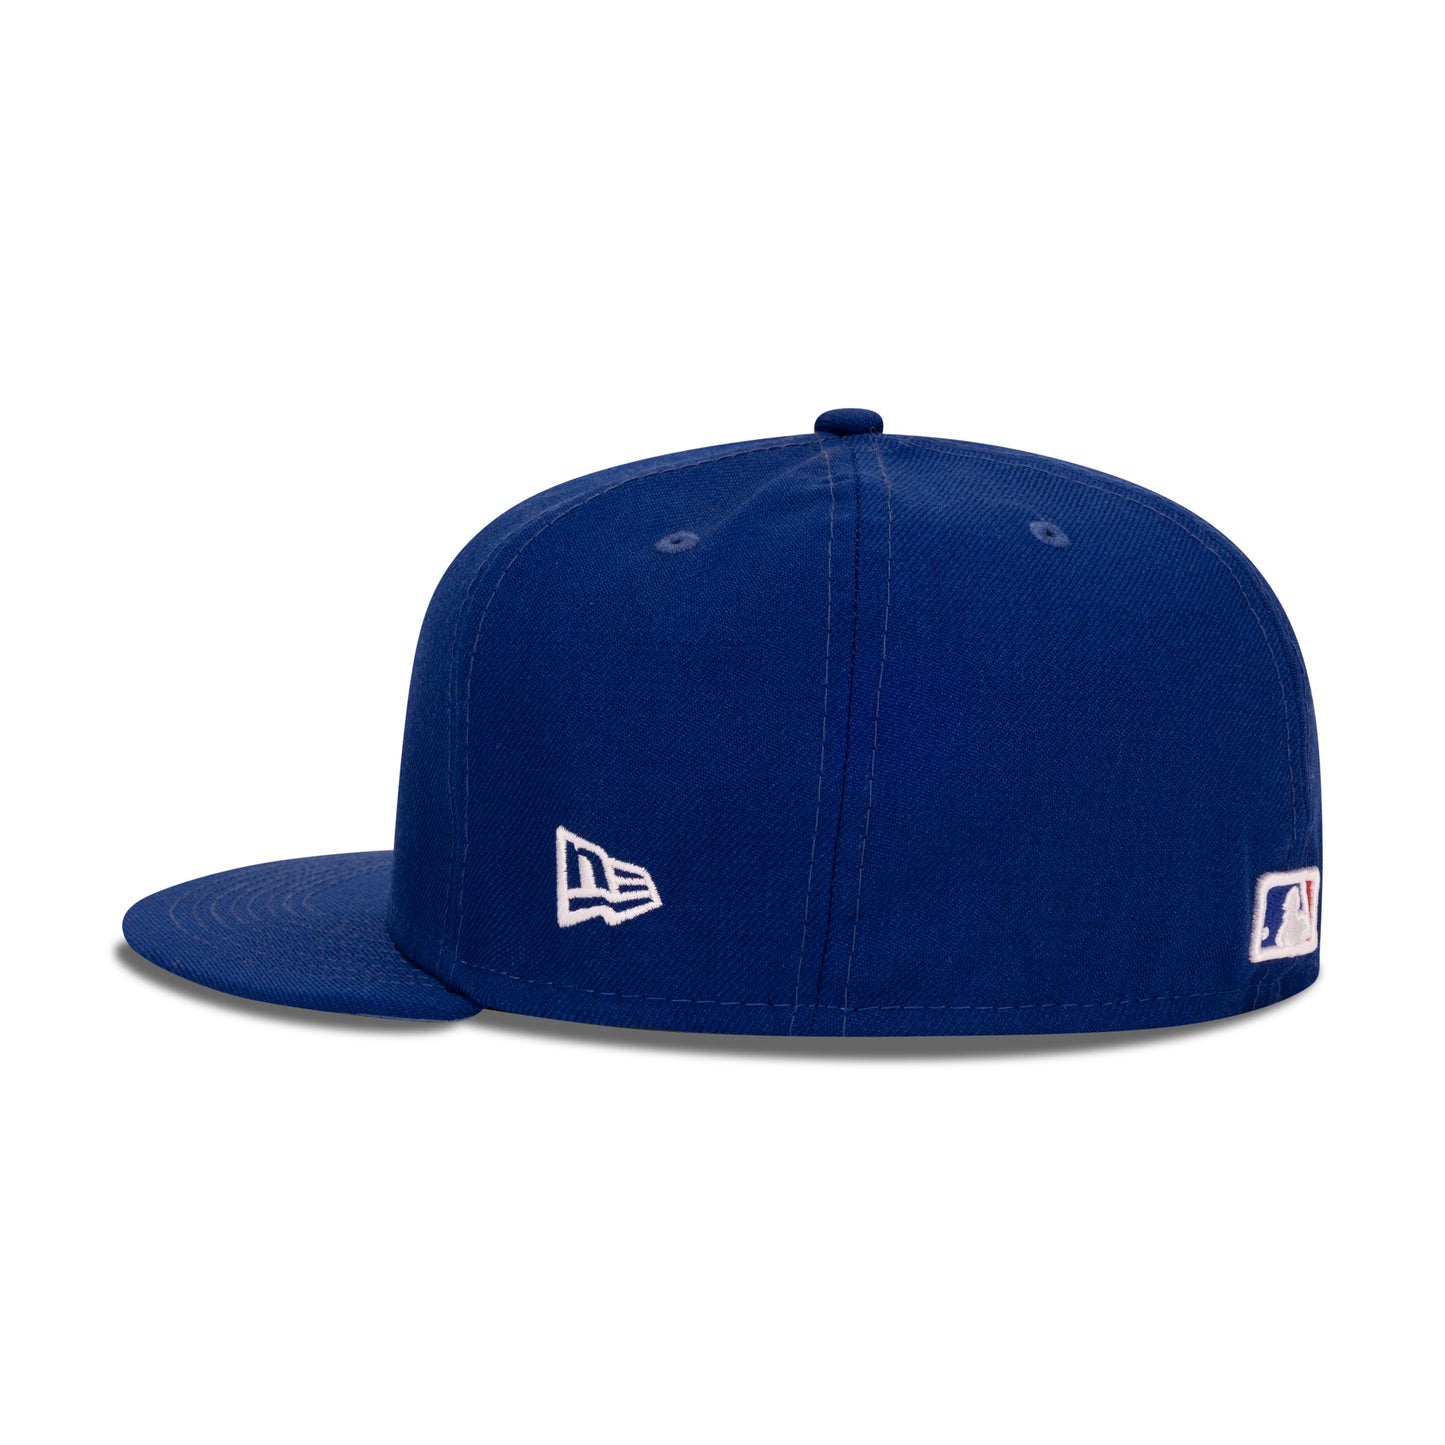 New Era Washington Nationals Fitted Sky Blue Bottom "Royal White" (2019 World Series Embroidery)